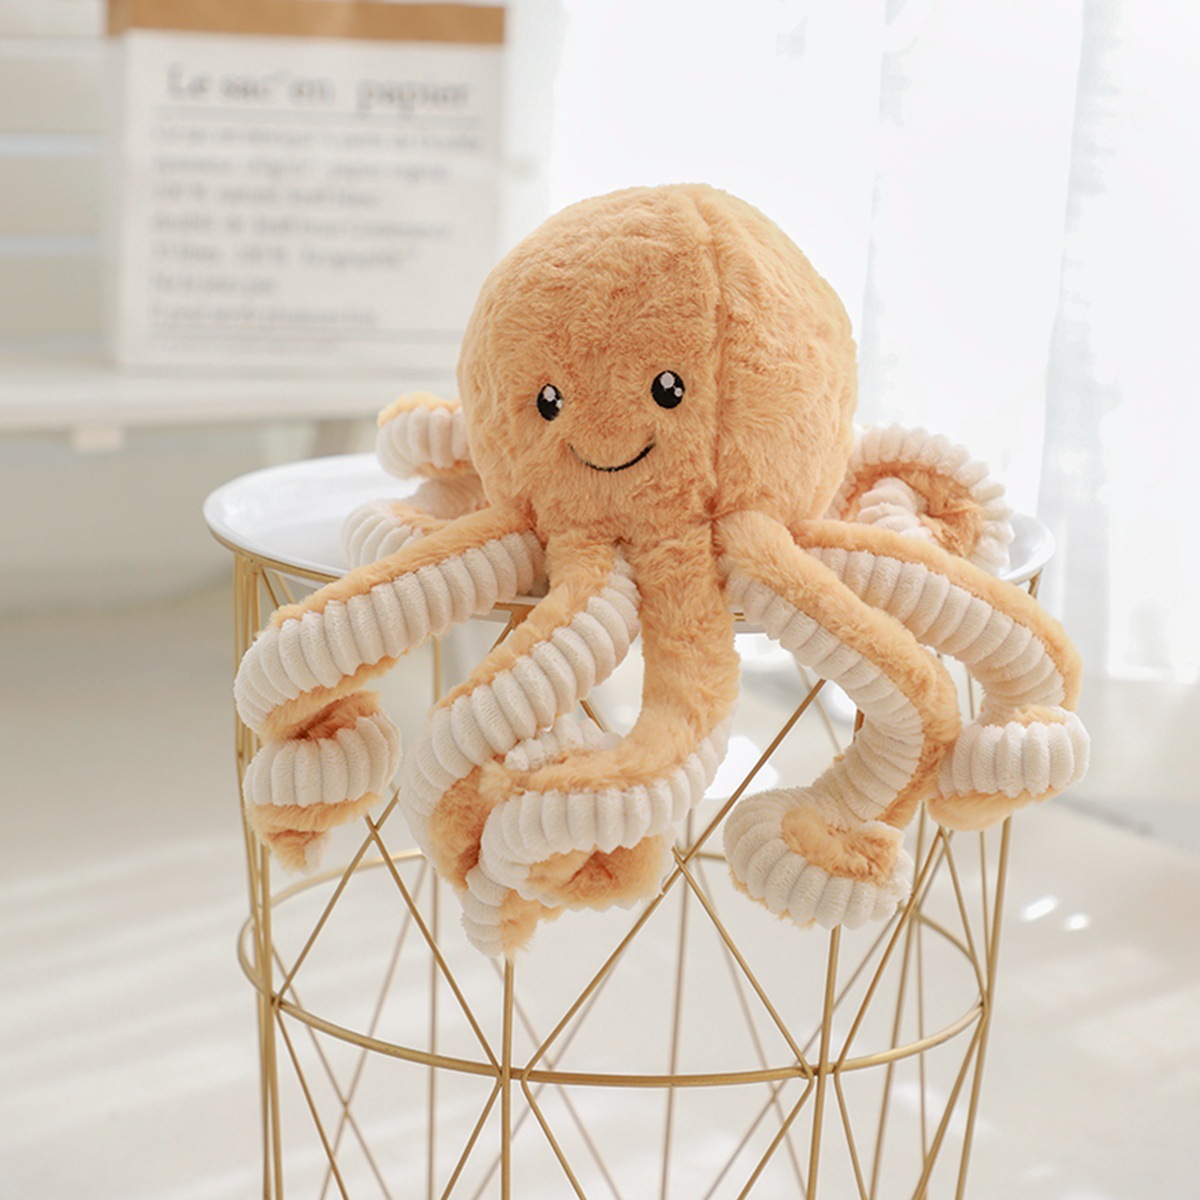 Octopus Plushies Cute Octopus Plush Pendant - Soft Stuffed Toy for Kids & Home Decor